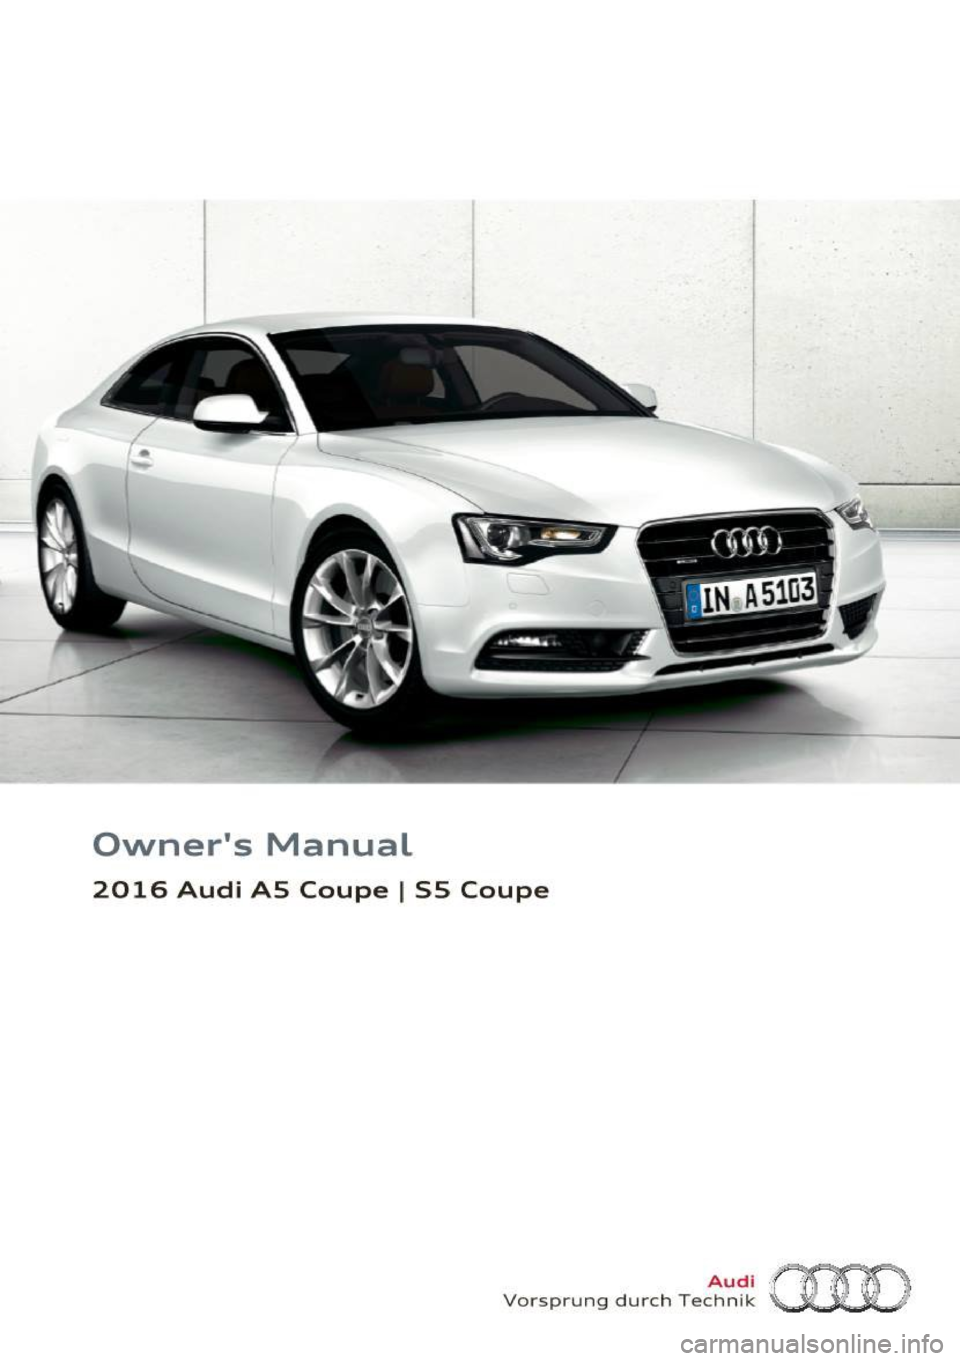 AUDI A5 COUPE 2016  Owners Manual Owners  Manual 
2016  Audi  AS  Coupe I S5  Coupe 
Vorsprung  durch Te~~?~ (HD  